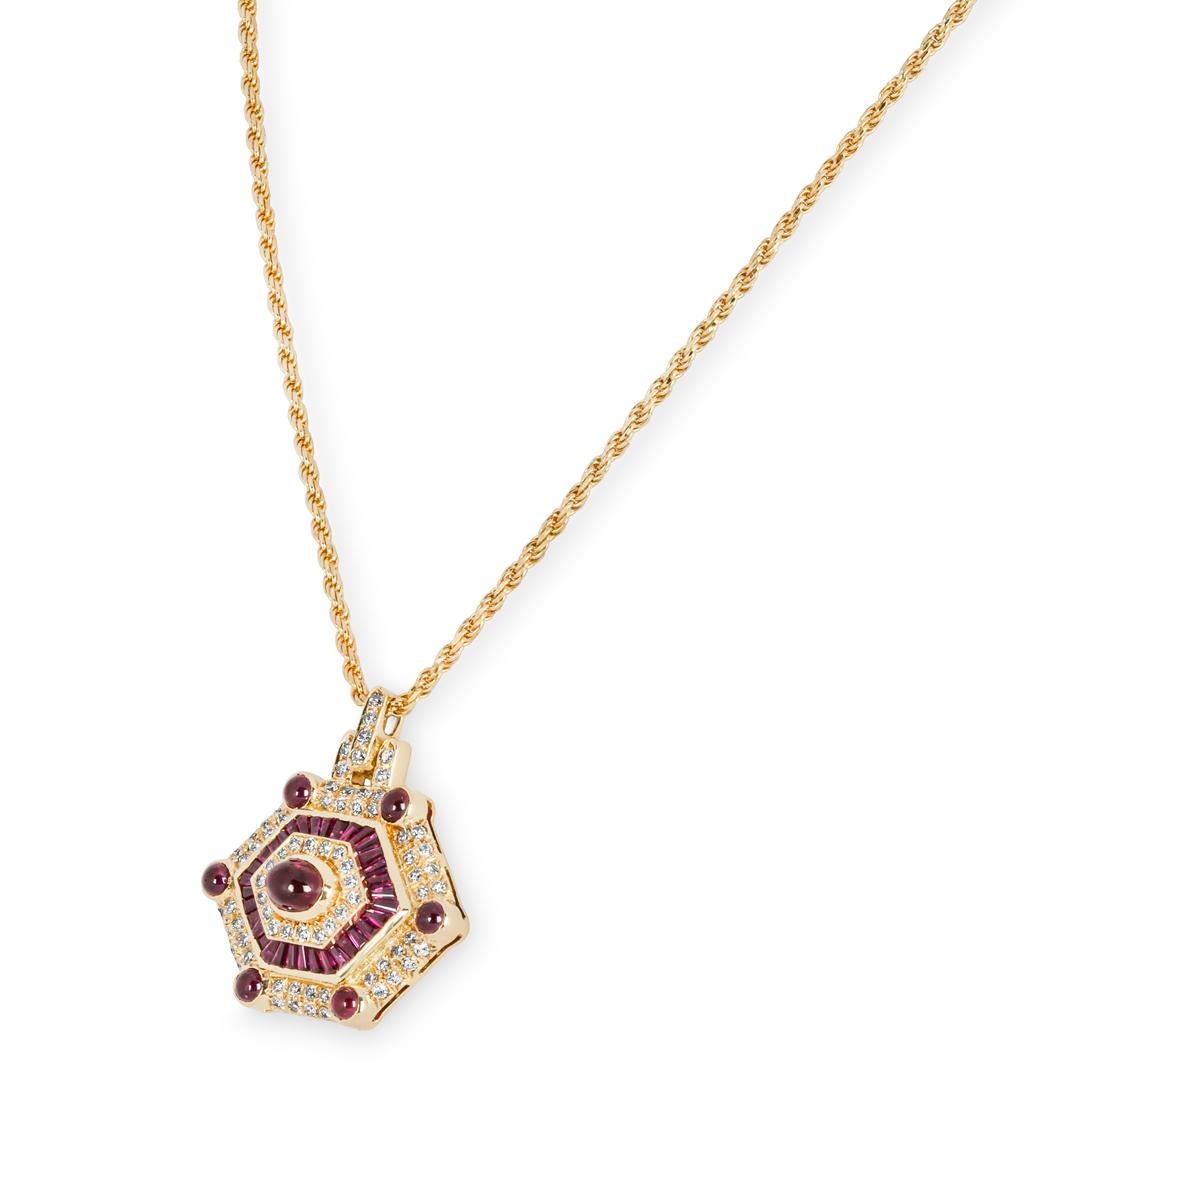 A beautiful 18k yellow gold ruby and diamond pendant. The necklace consists of a diamond set bail leading to a hexagon-shaped pendant. The pendant alternates between round brilliant cut diamonds, tapered baguette cut rubies and cabochon cut rubies.